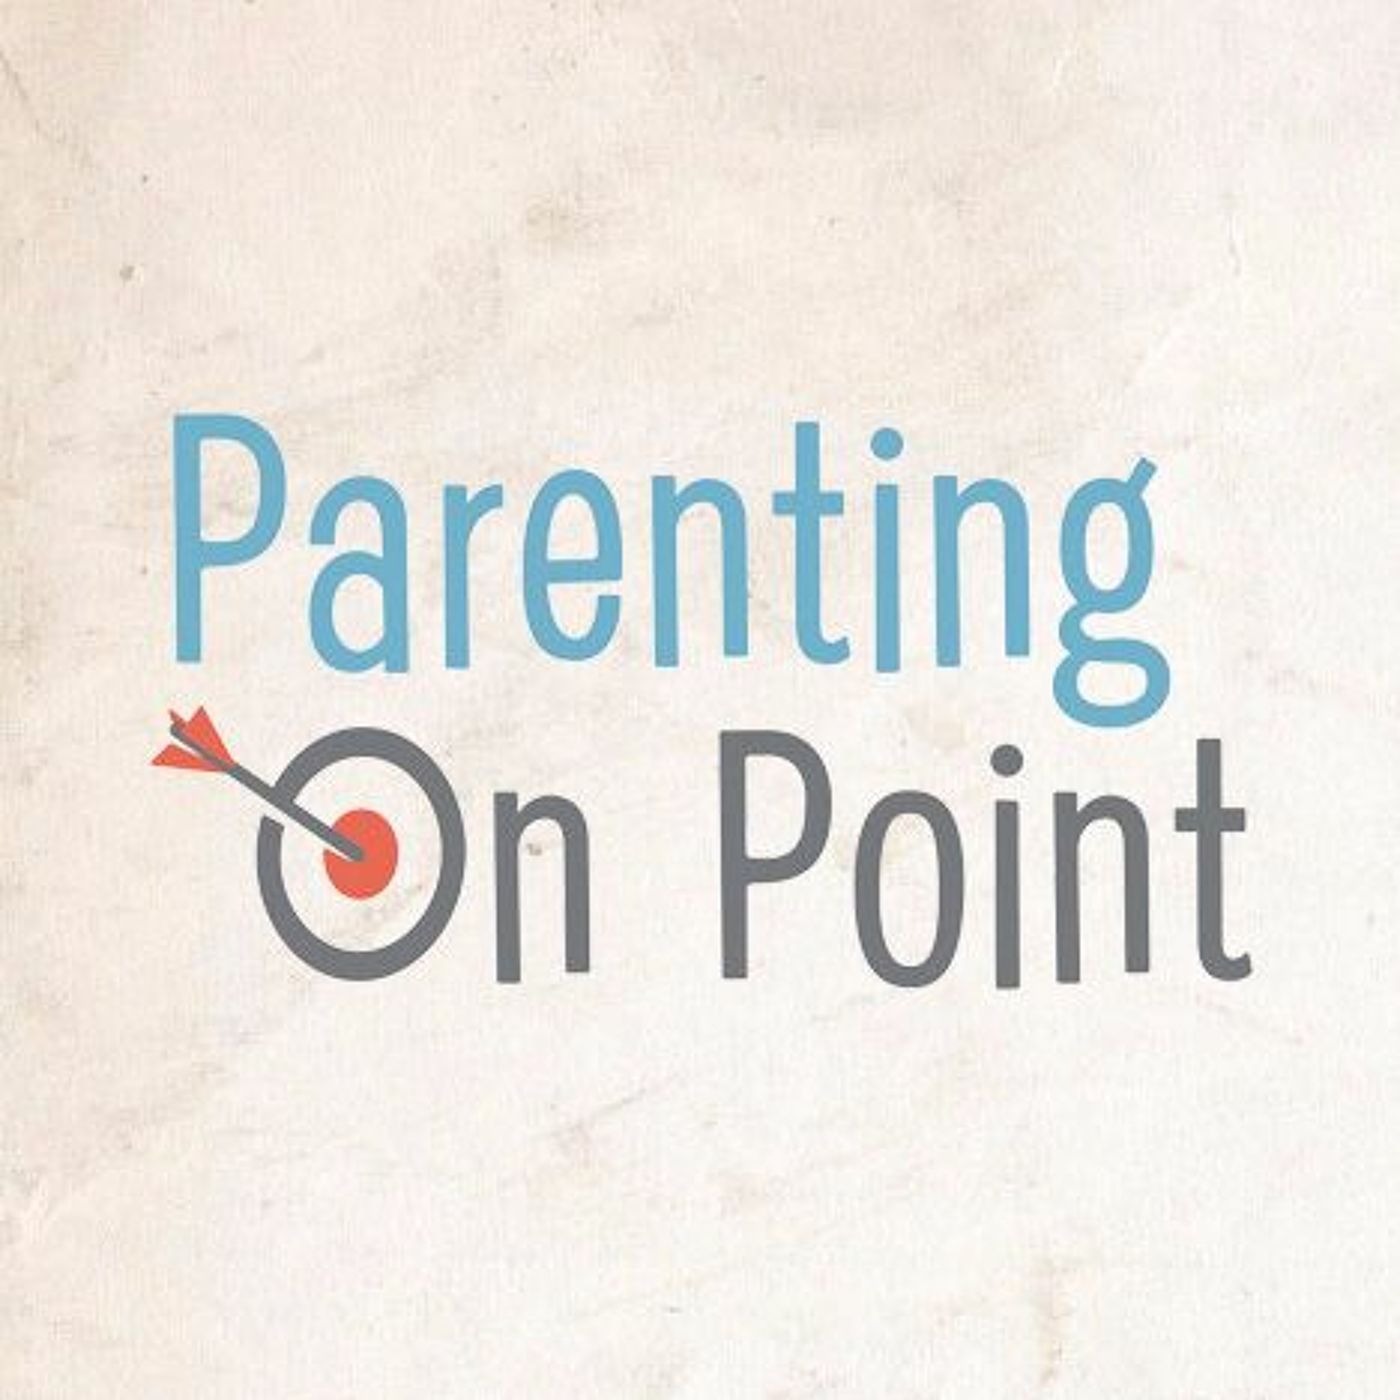 Parenting On Point #1 - Start with Love